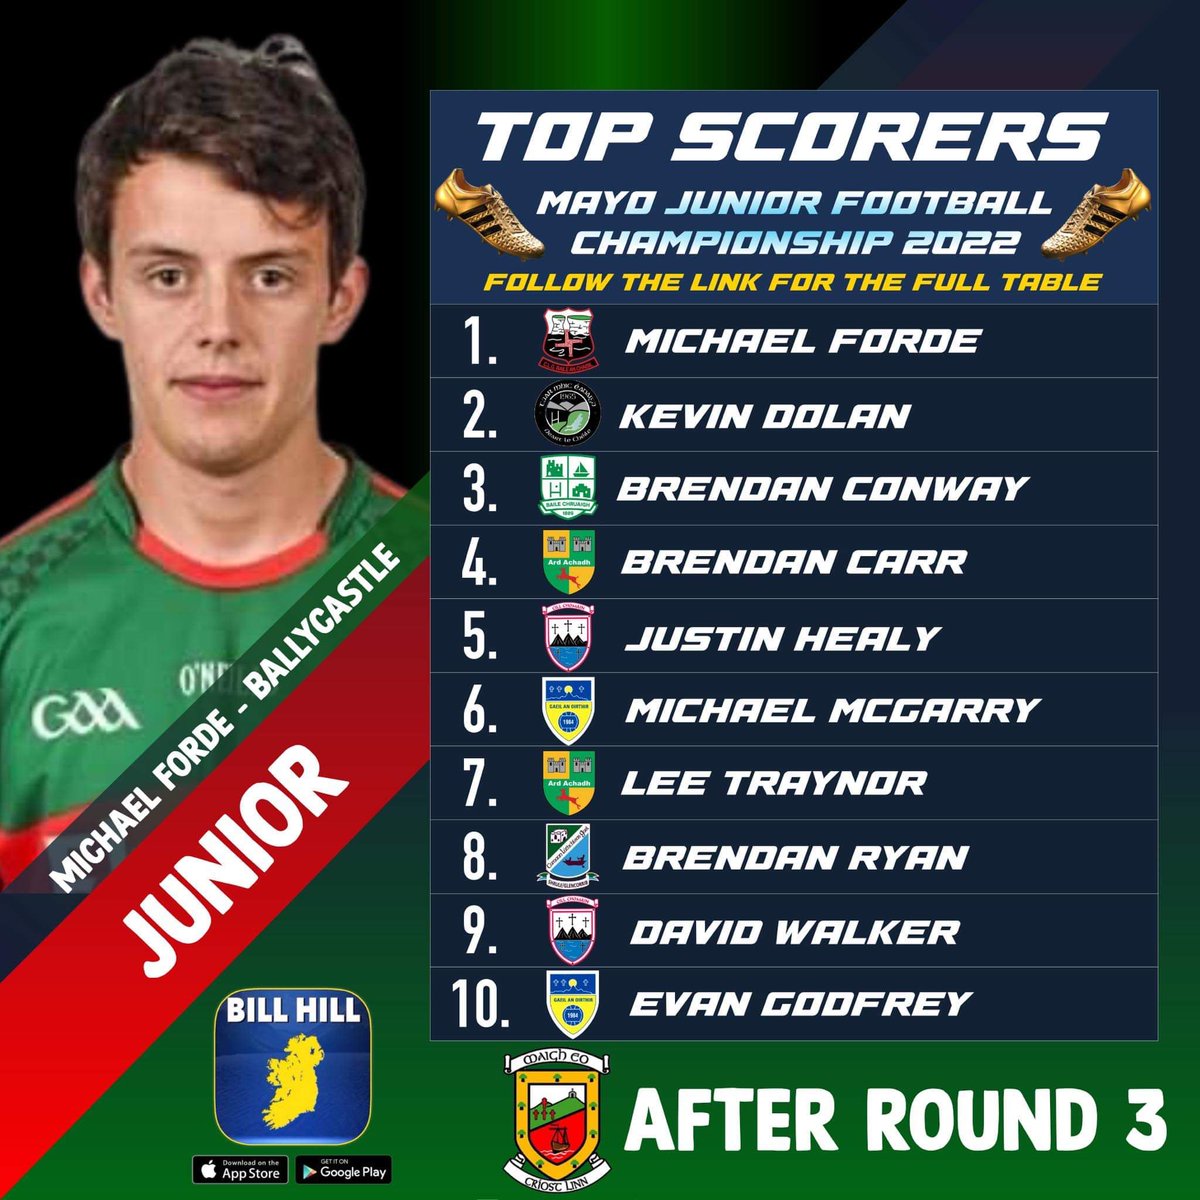 test Twitter Media - C.L.G Baile an Chaisil/Ballycastle Gaa Michael Forde is in top spot again after Rd 3 of the TF Royal Hotel and Theatre Junior championship top scorers as we approach the Quarter Final stages 🔥 👏👏👏

Full table here:🔽🔽🔽
https://t.co/6KMrvGTIE1
#mayogaa #billhill https://t.co/FmWocOSVY3